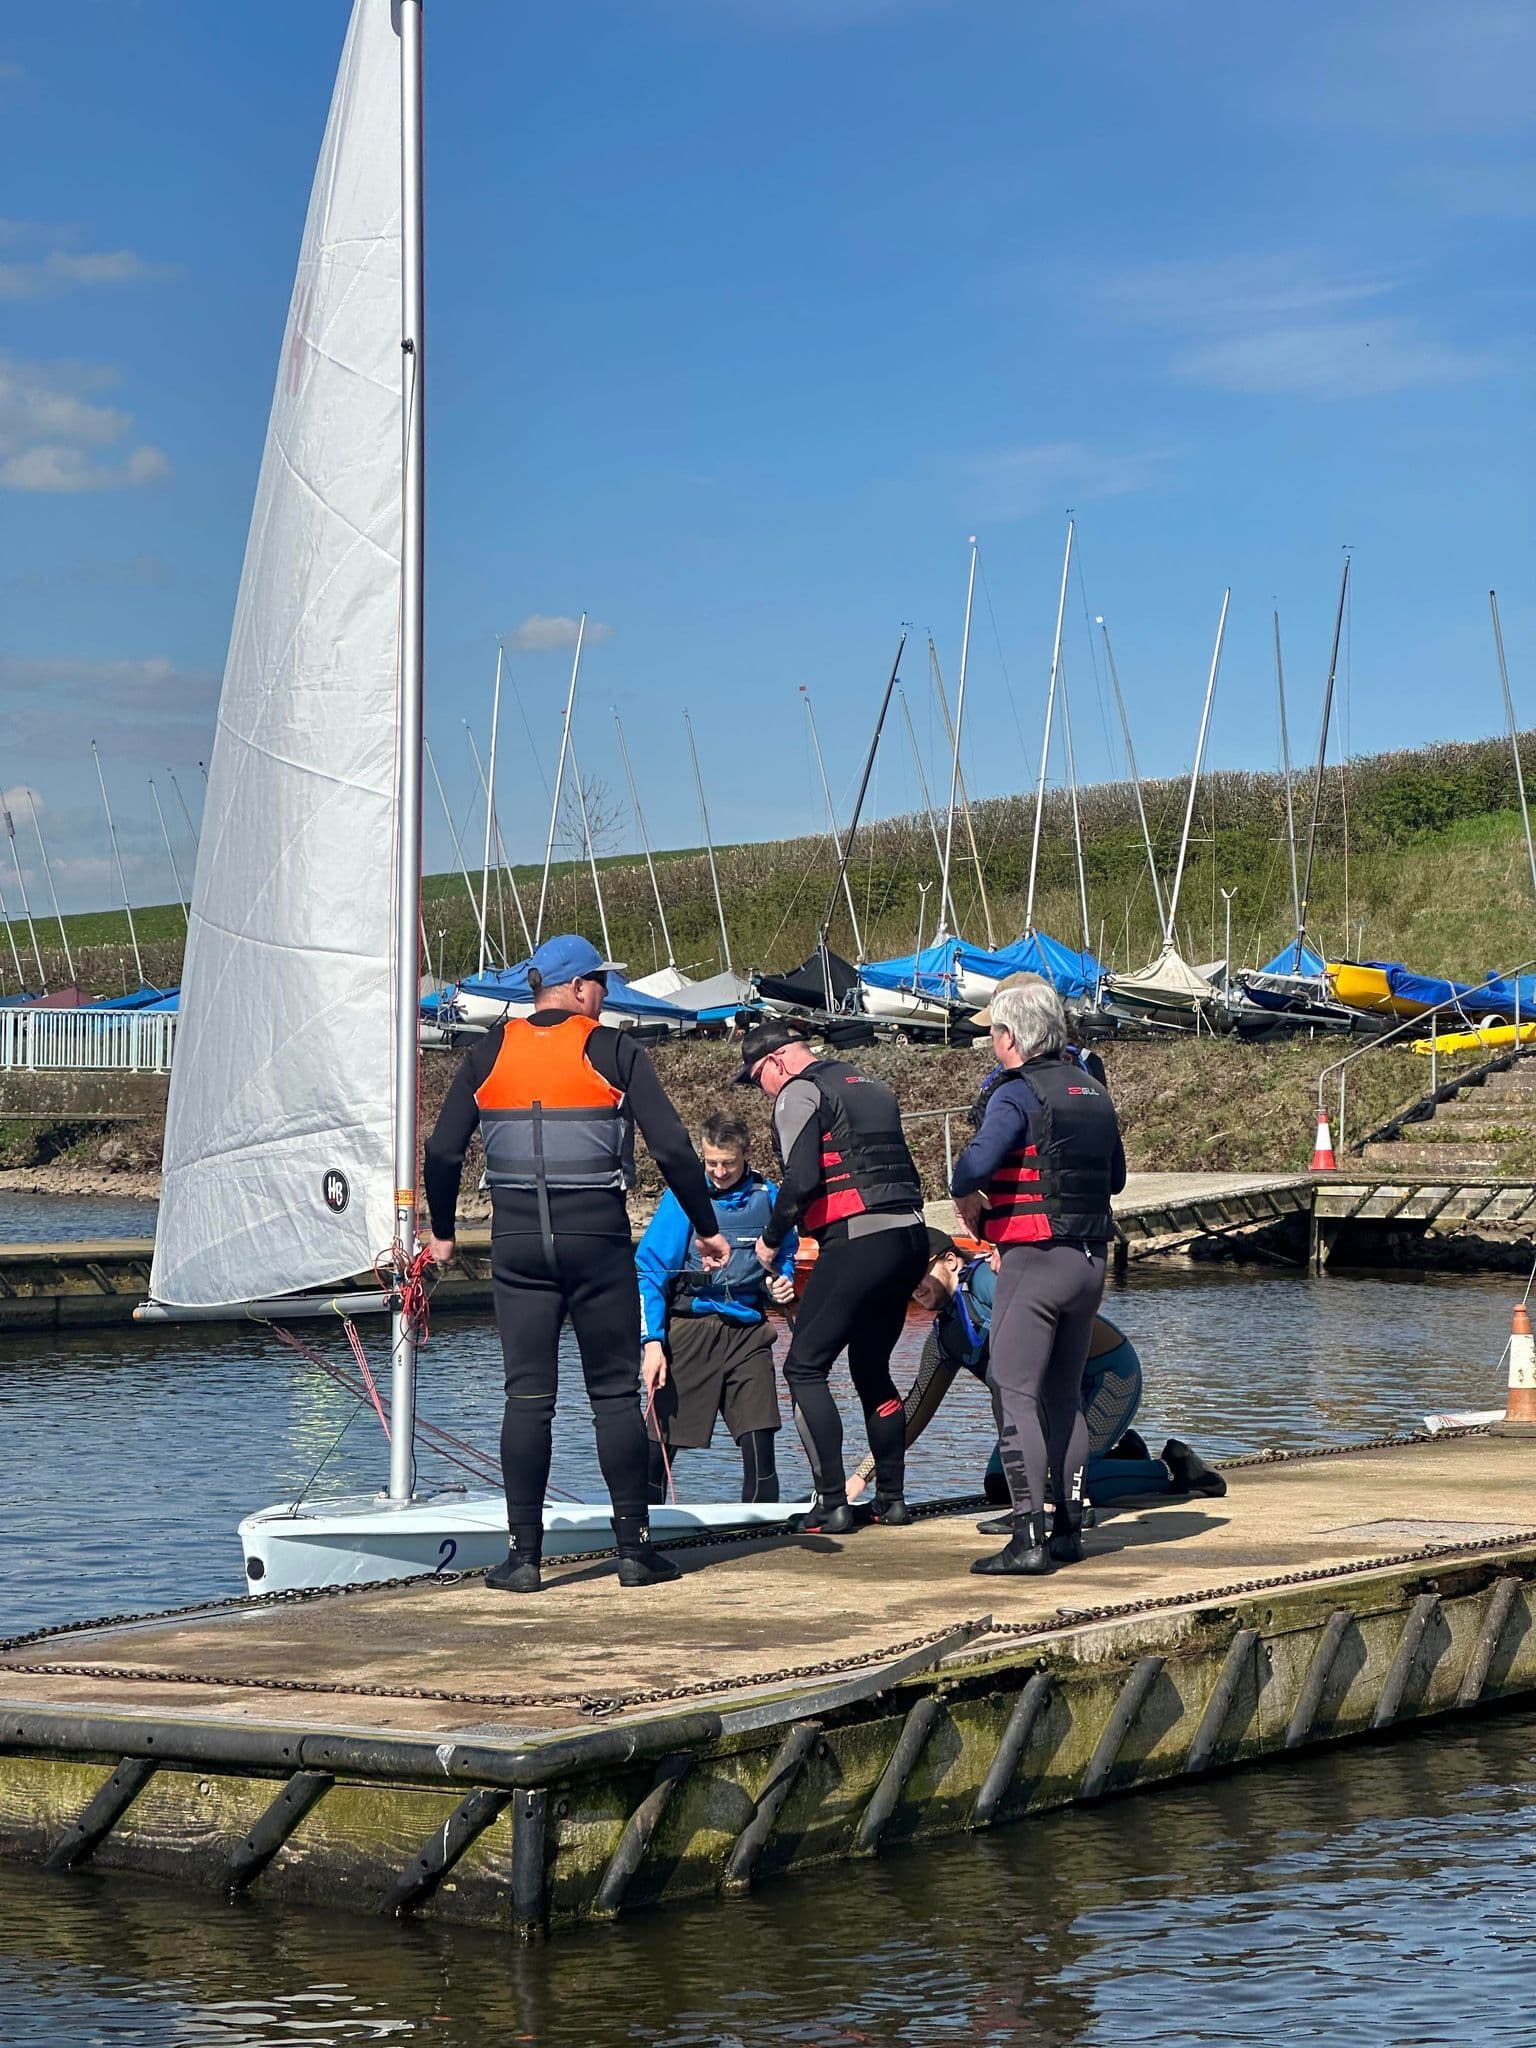 First time sailors coming to a Taster session